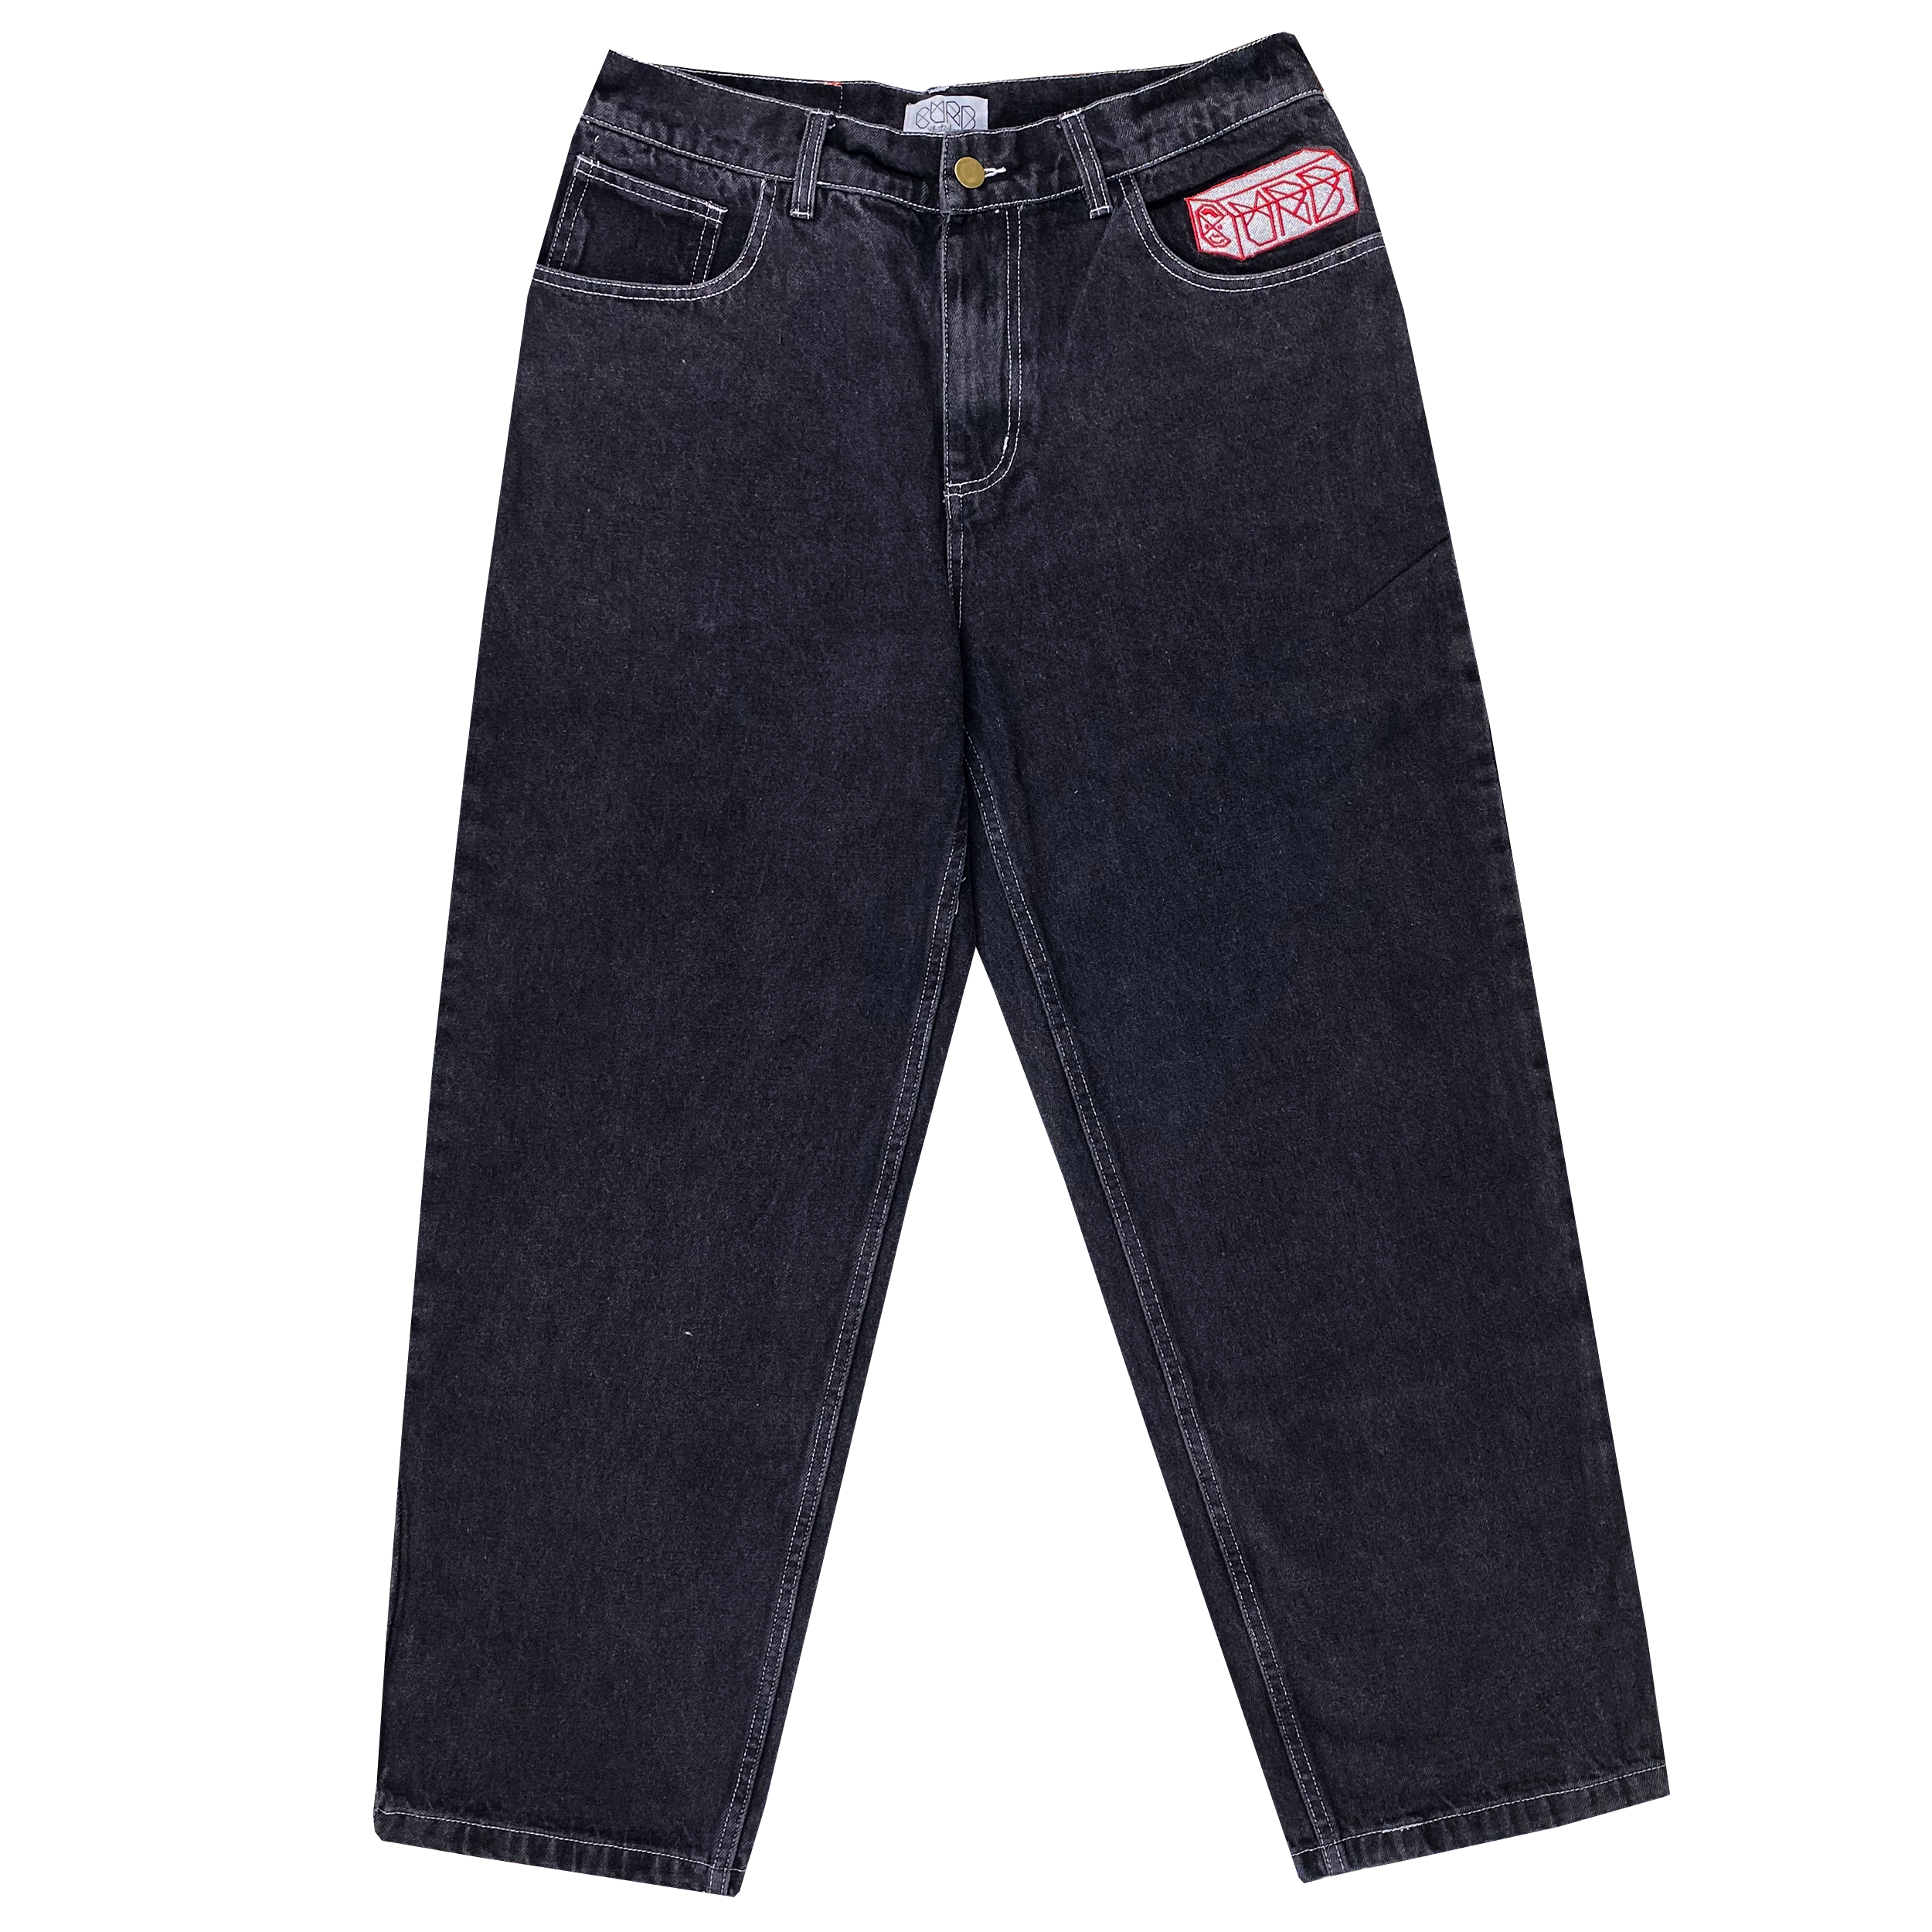 Curb G-Pant Washed Black